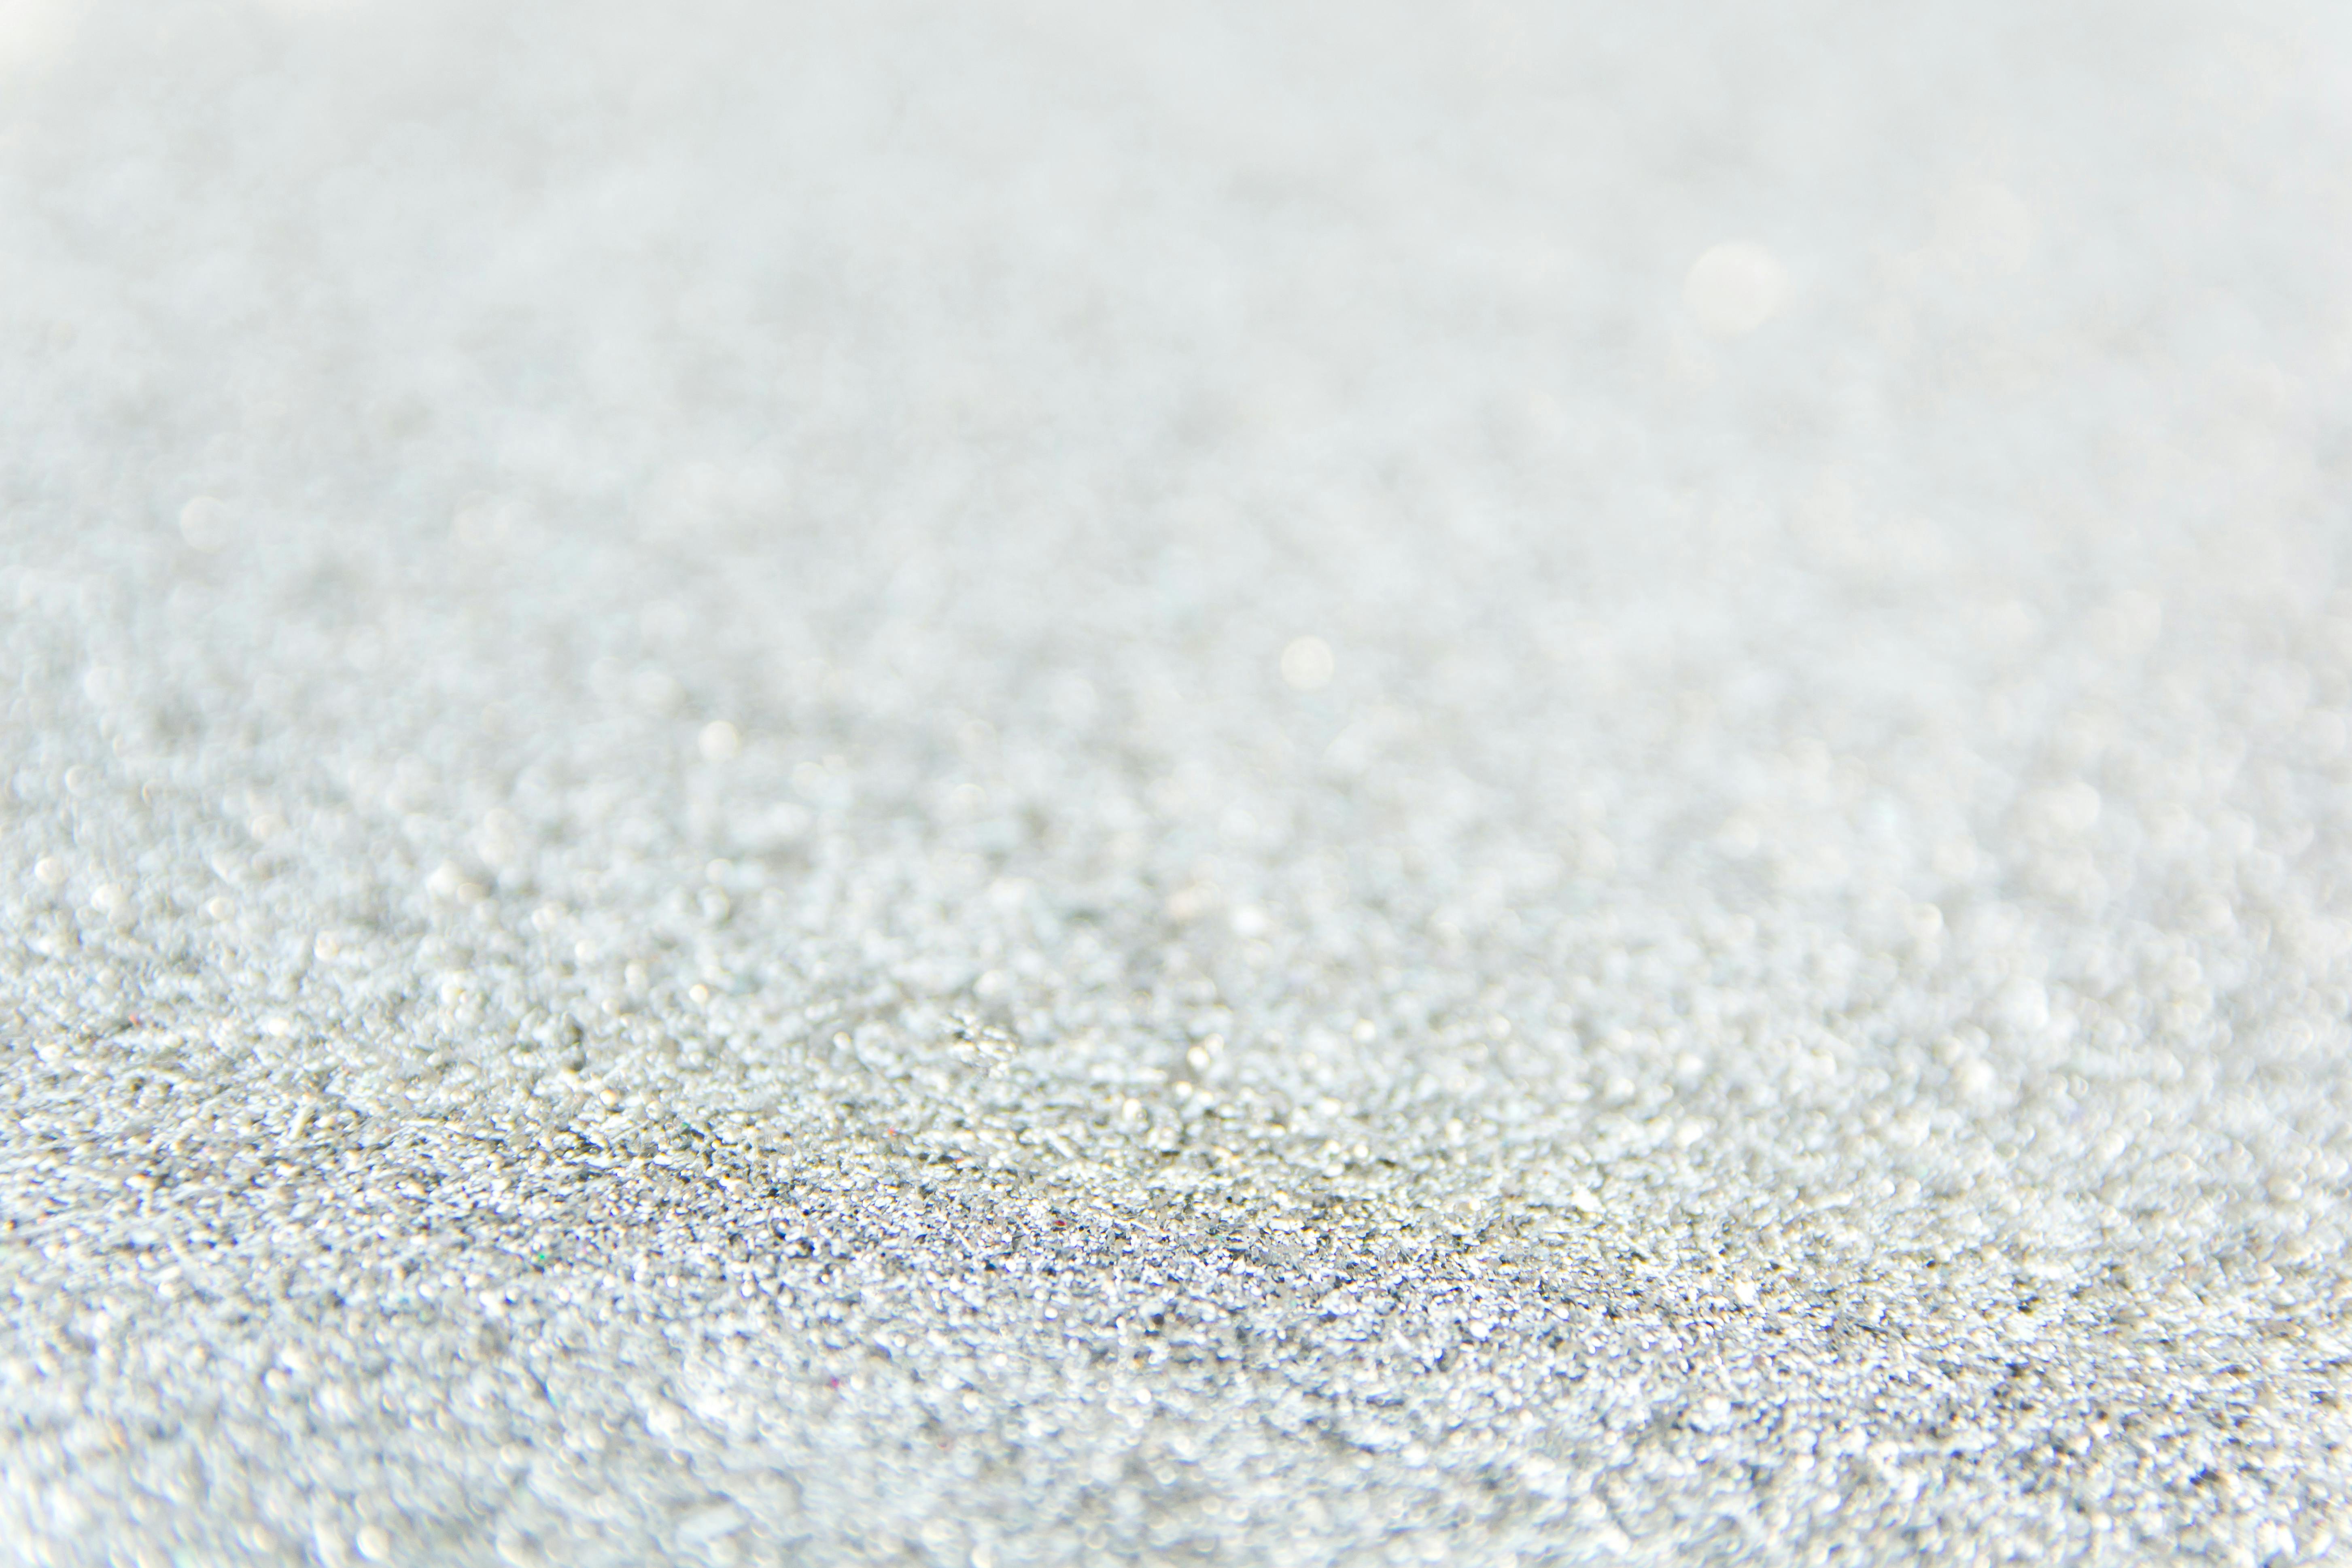 White Glitter Background Stock Photo - Download Image Now